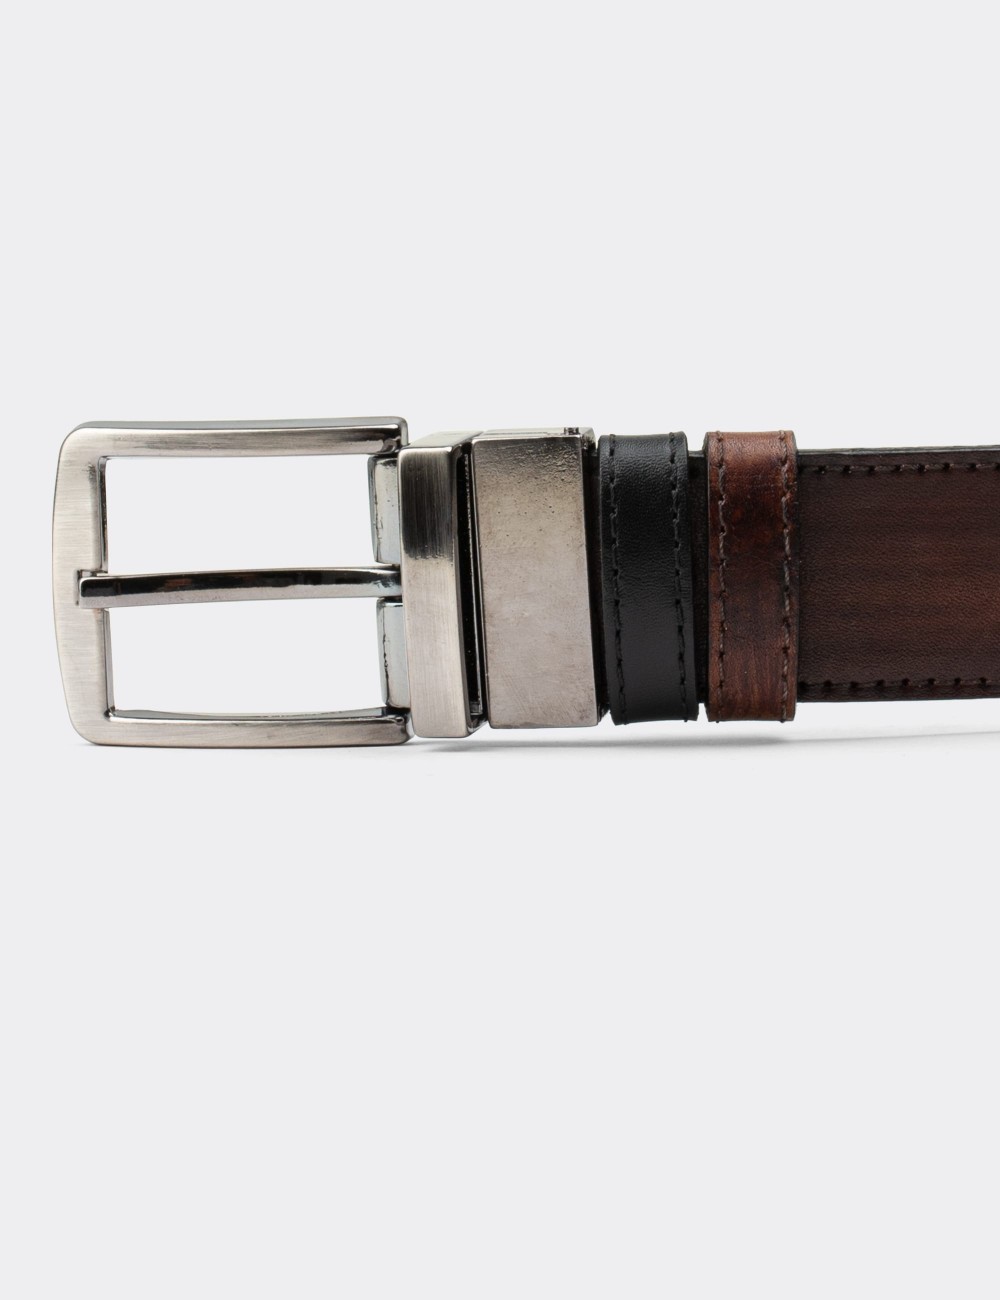  Leather Tan and Black Double Sided Men's Belt - K0409MTBAW01